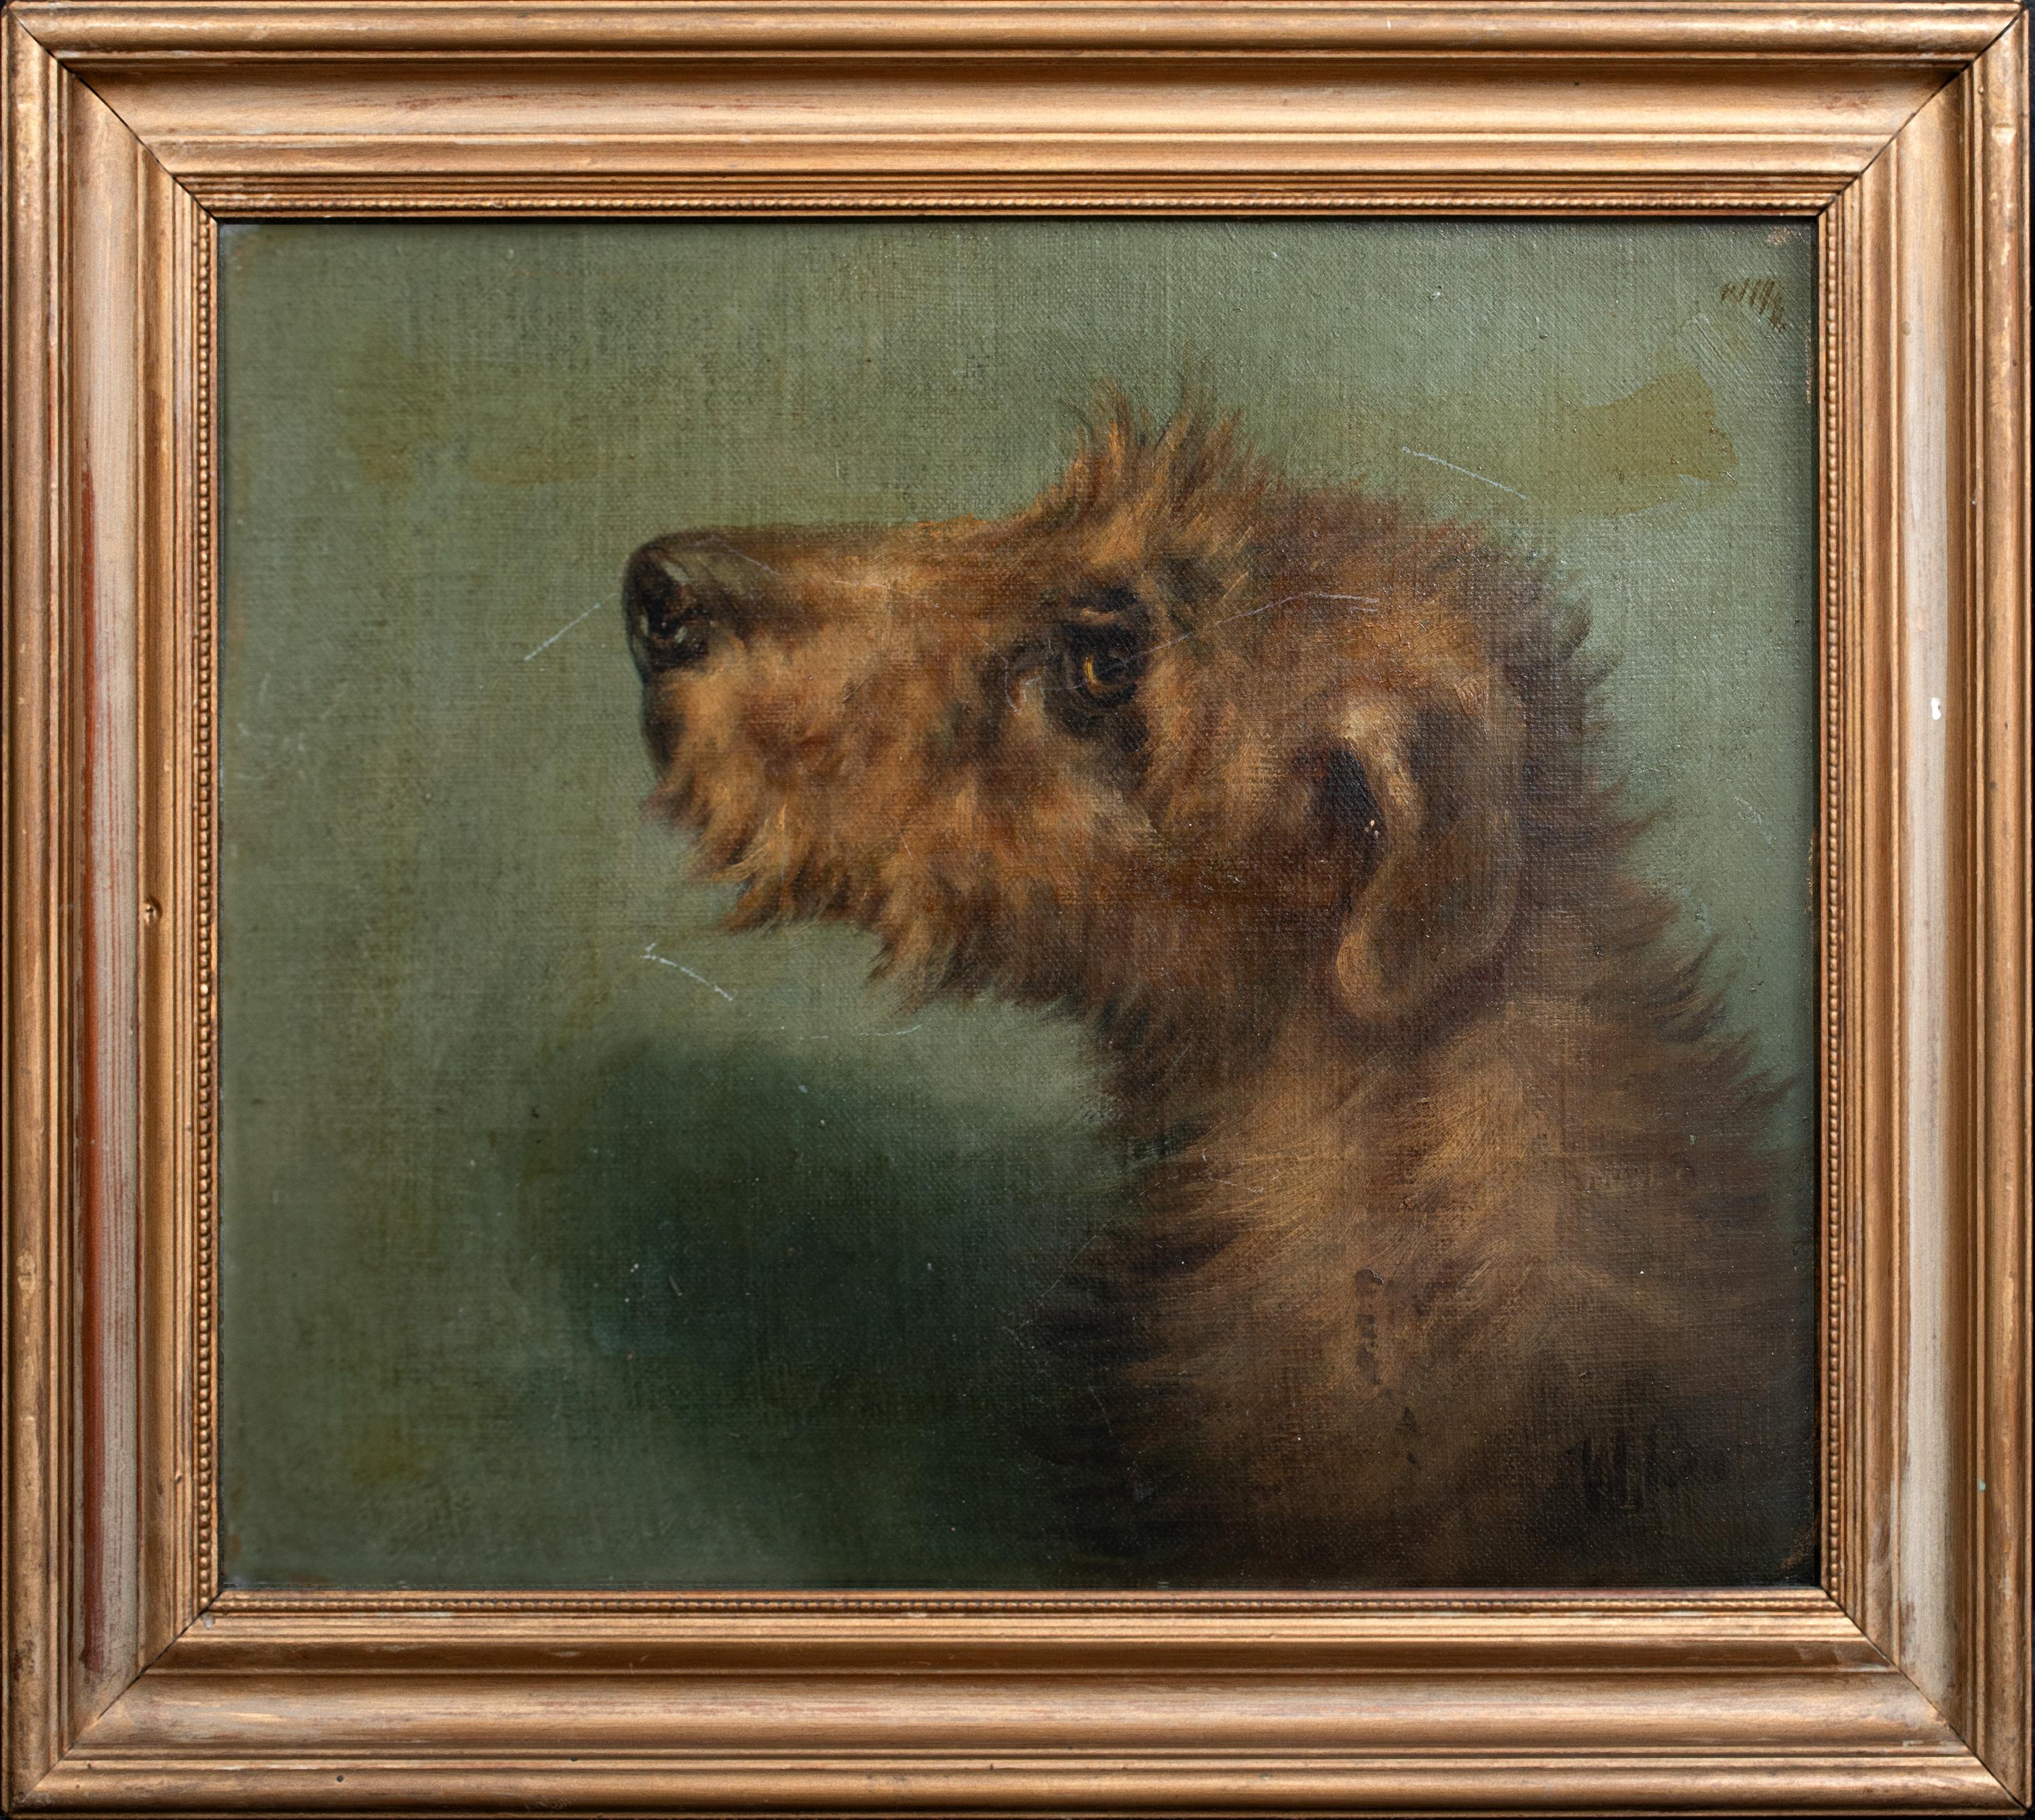 Unknown Animal Painting - Portrait Of An Irish Terrier, 19th Century  signed top right "EMMS"  Circa 1900 